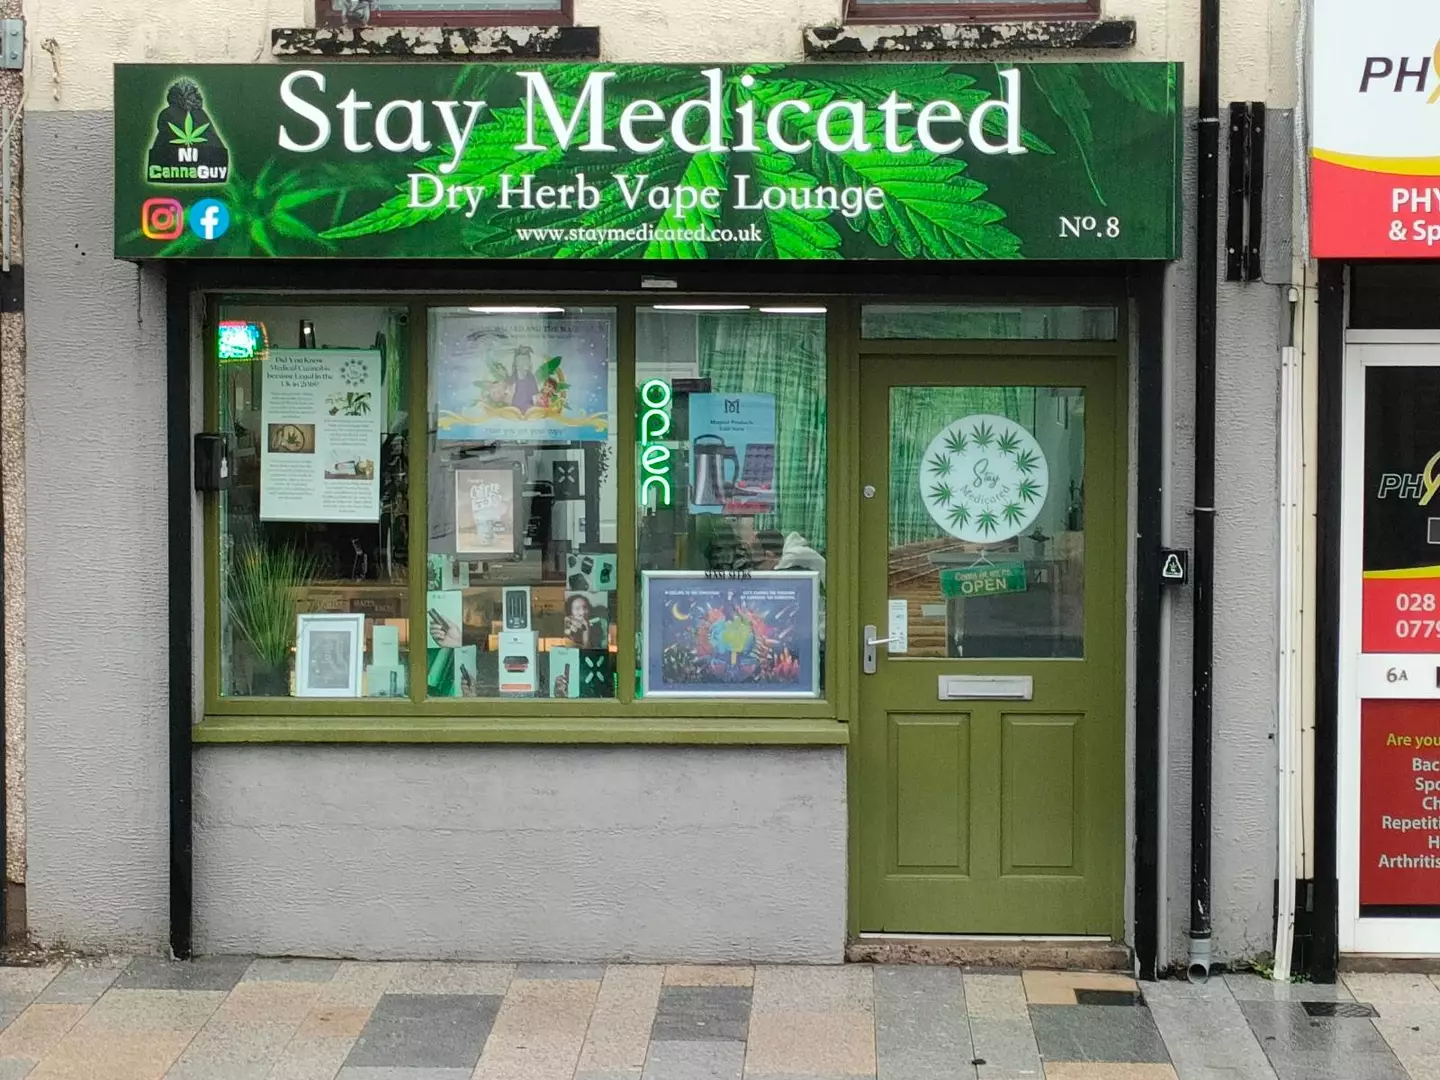 Stay Medicated in Ballyclare, Antrim.